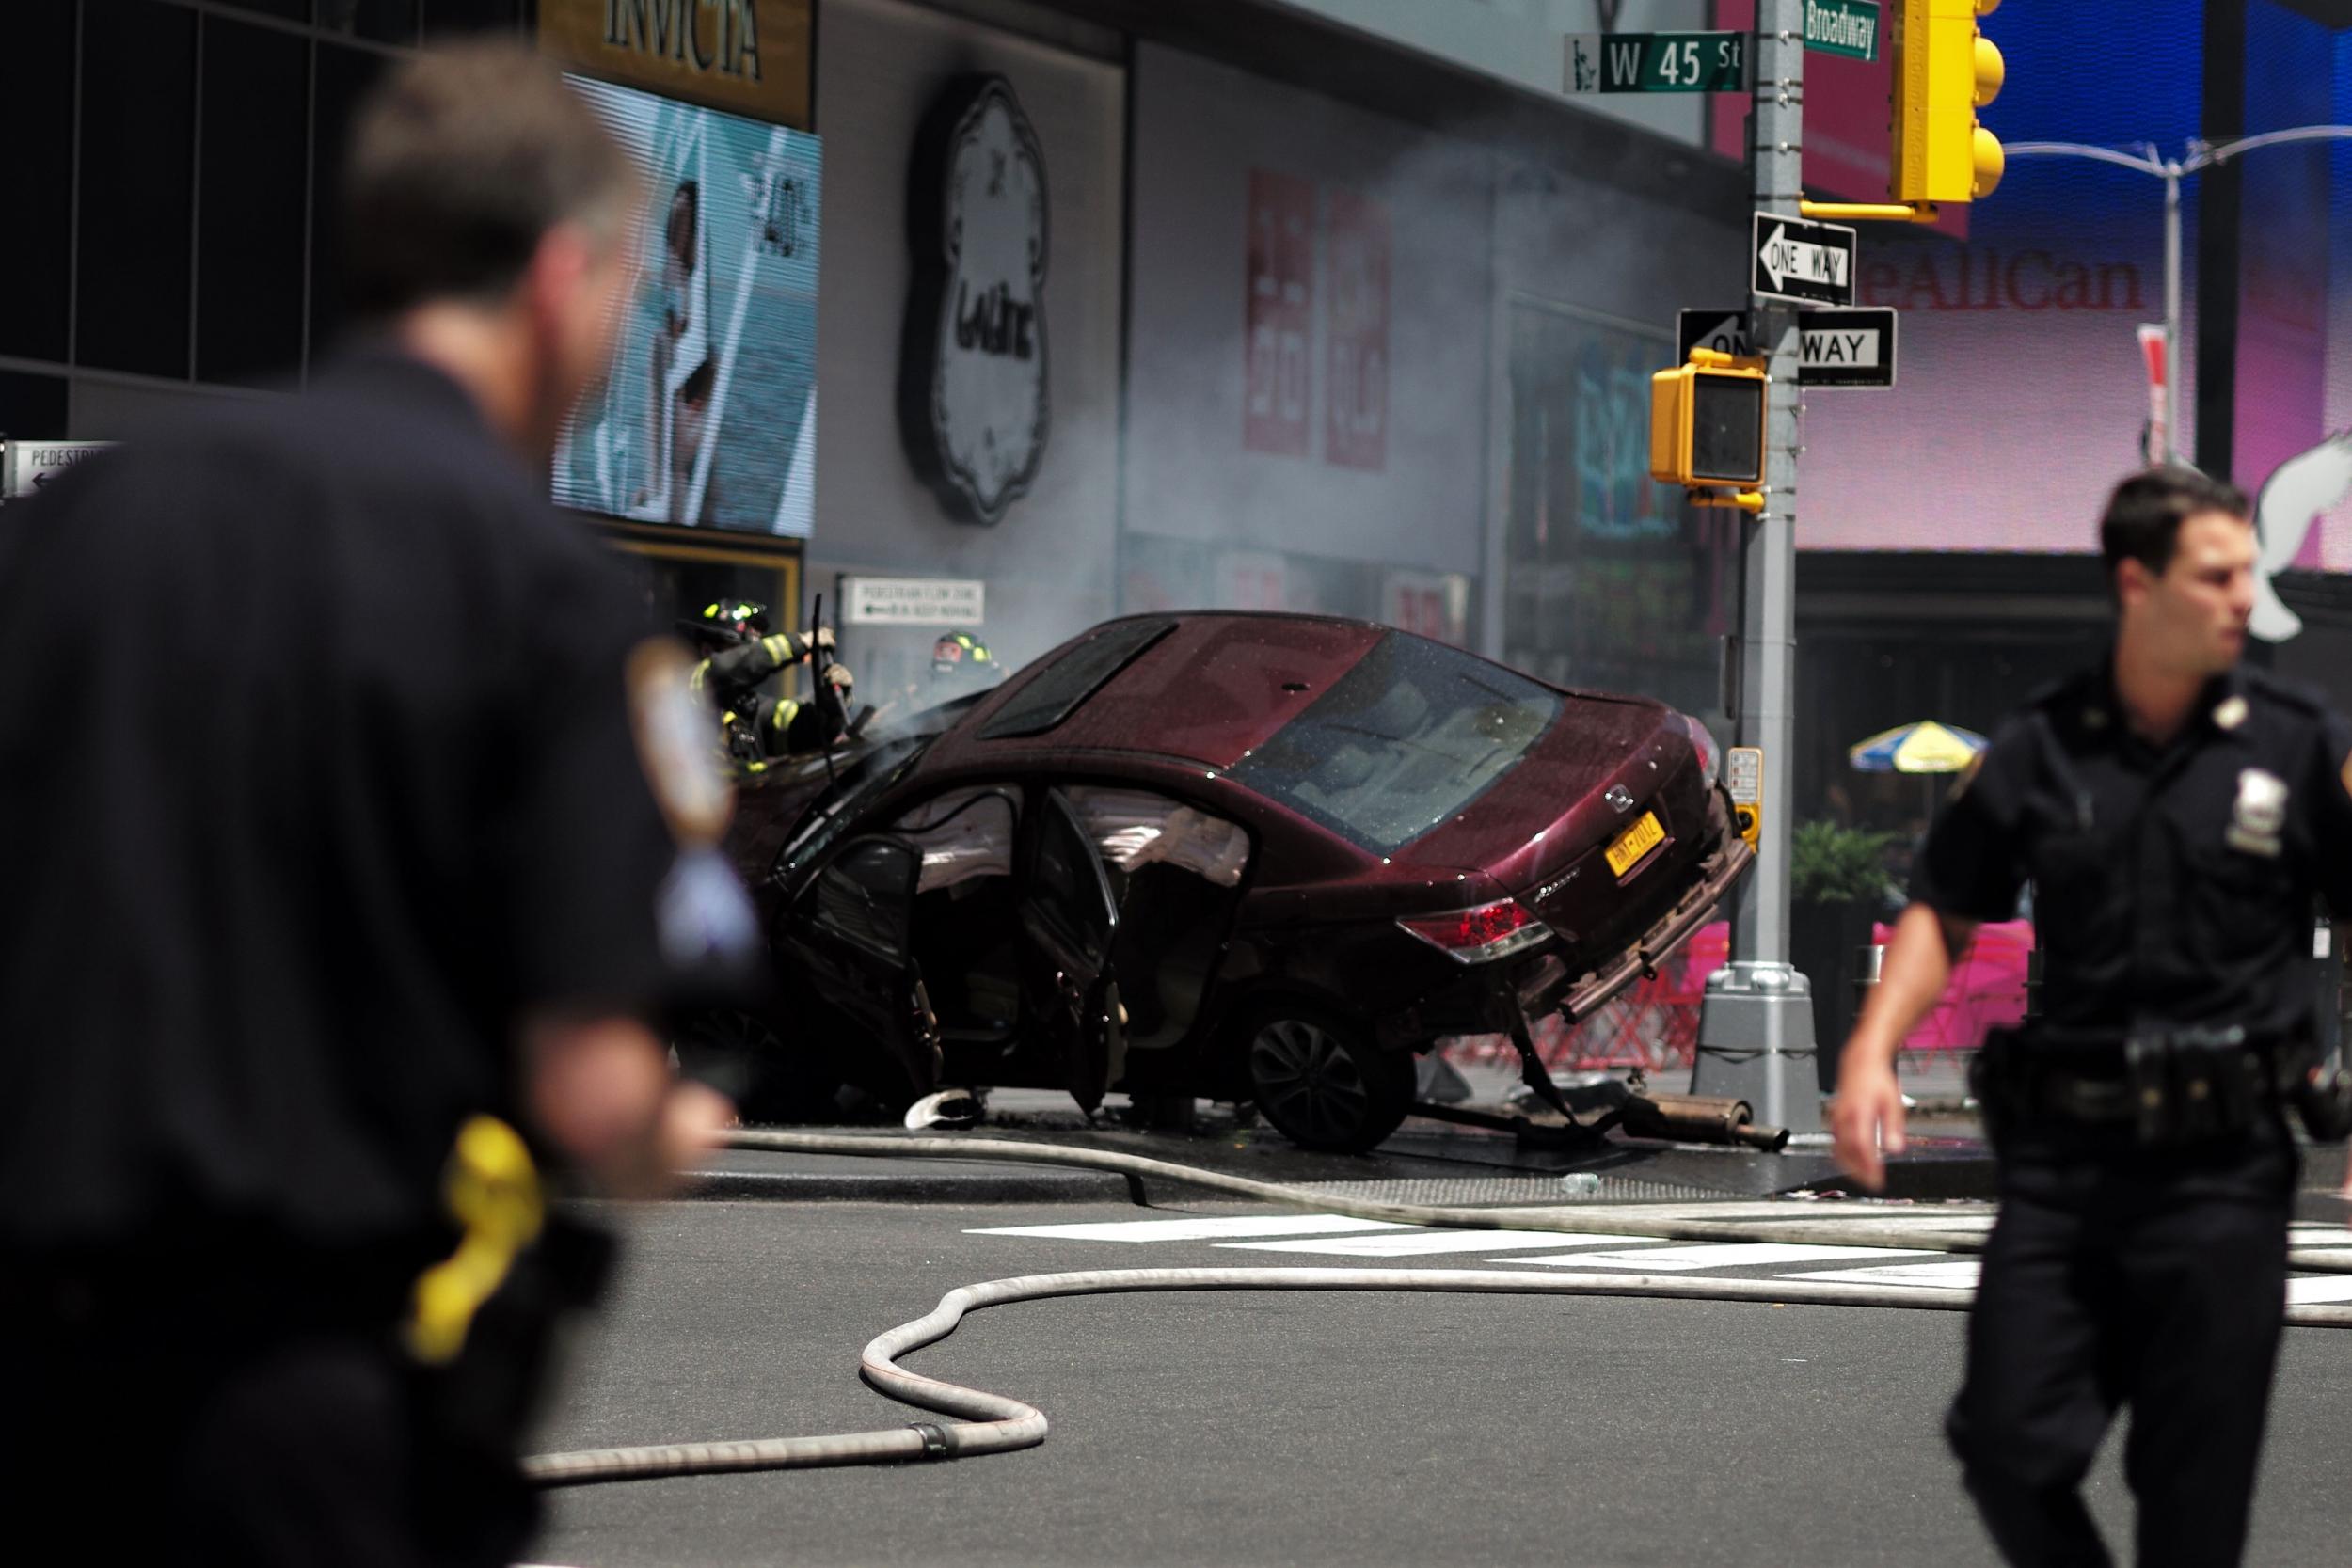 The man suspected of driving a car through Times Square has been identified as Richard Rojas